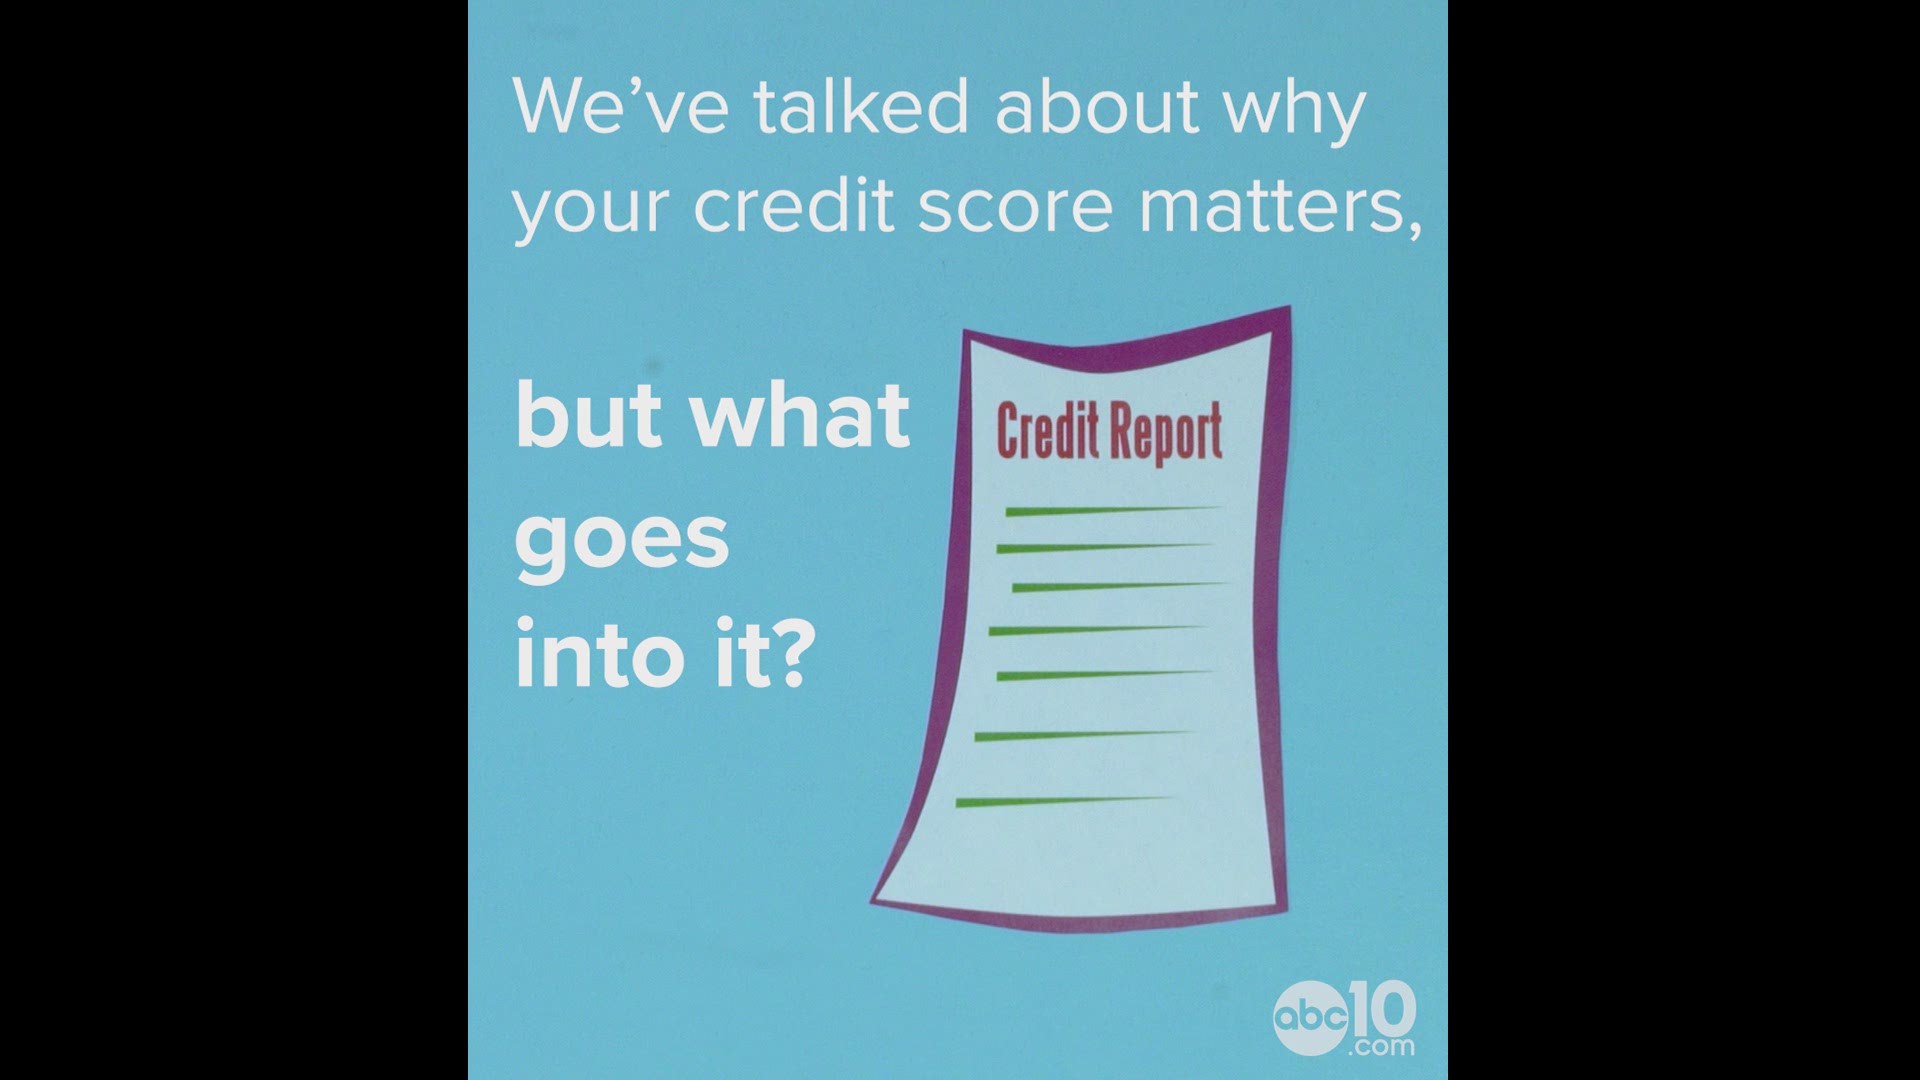 Some things are more important when it comes to your credit, like paying your bills on time.